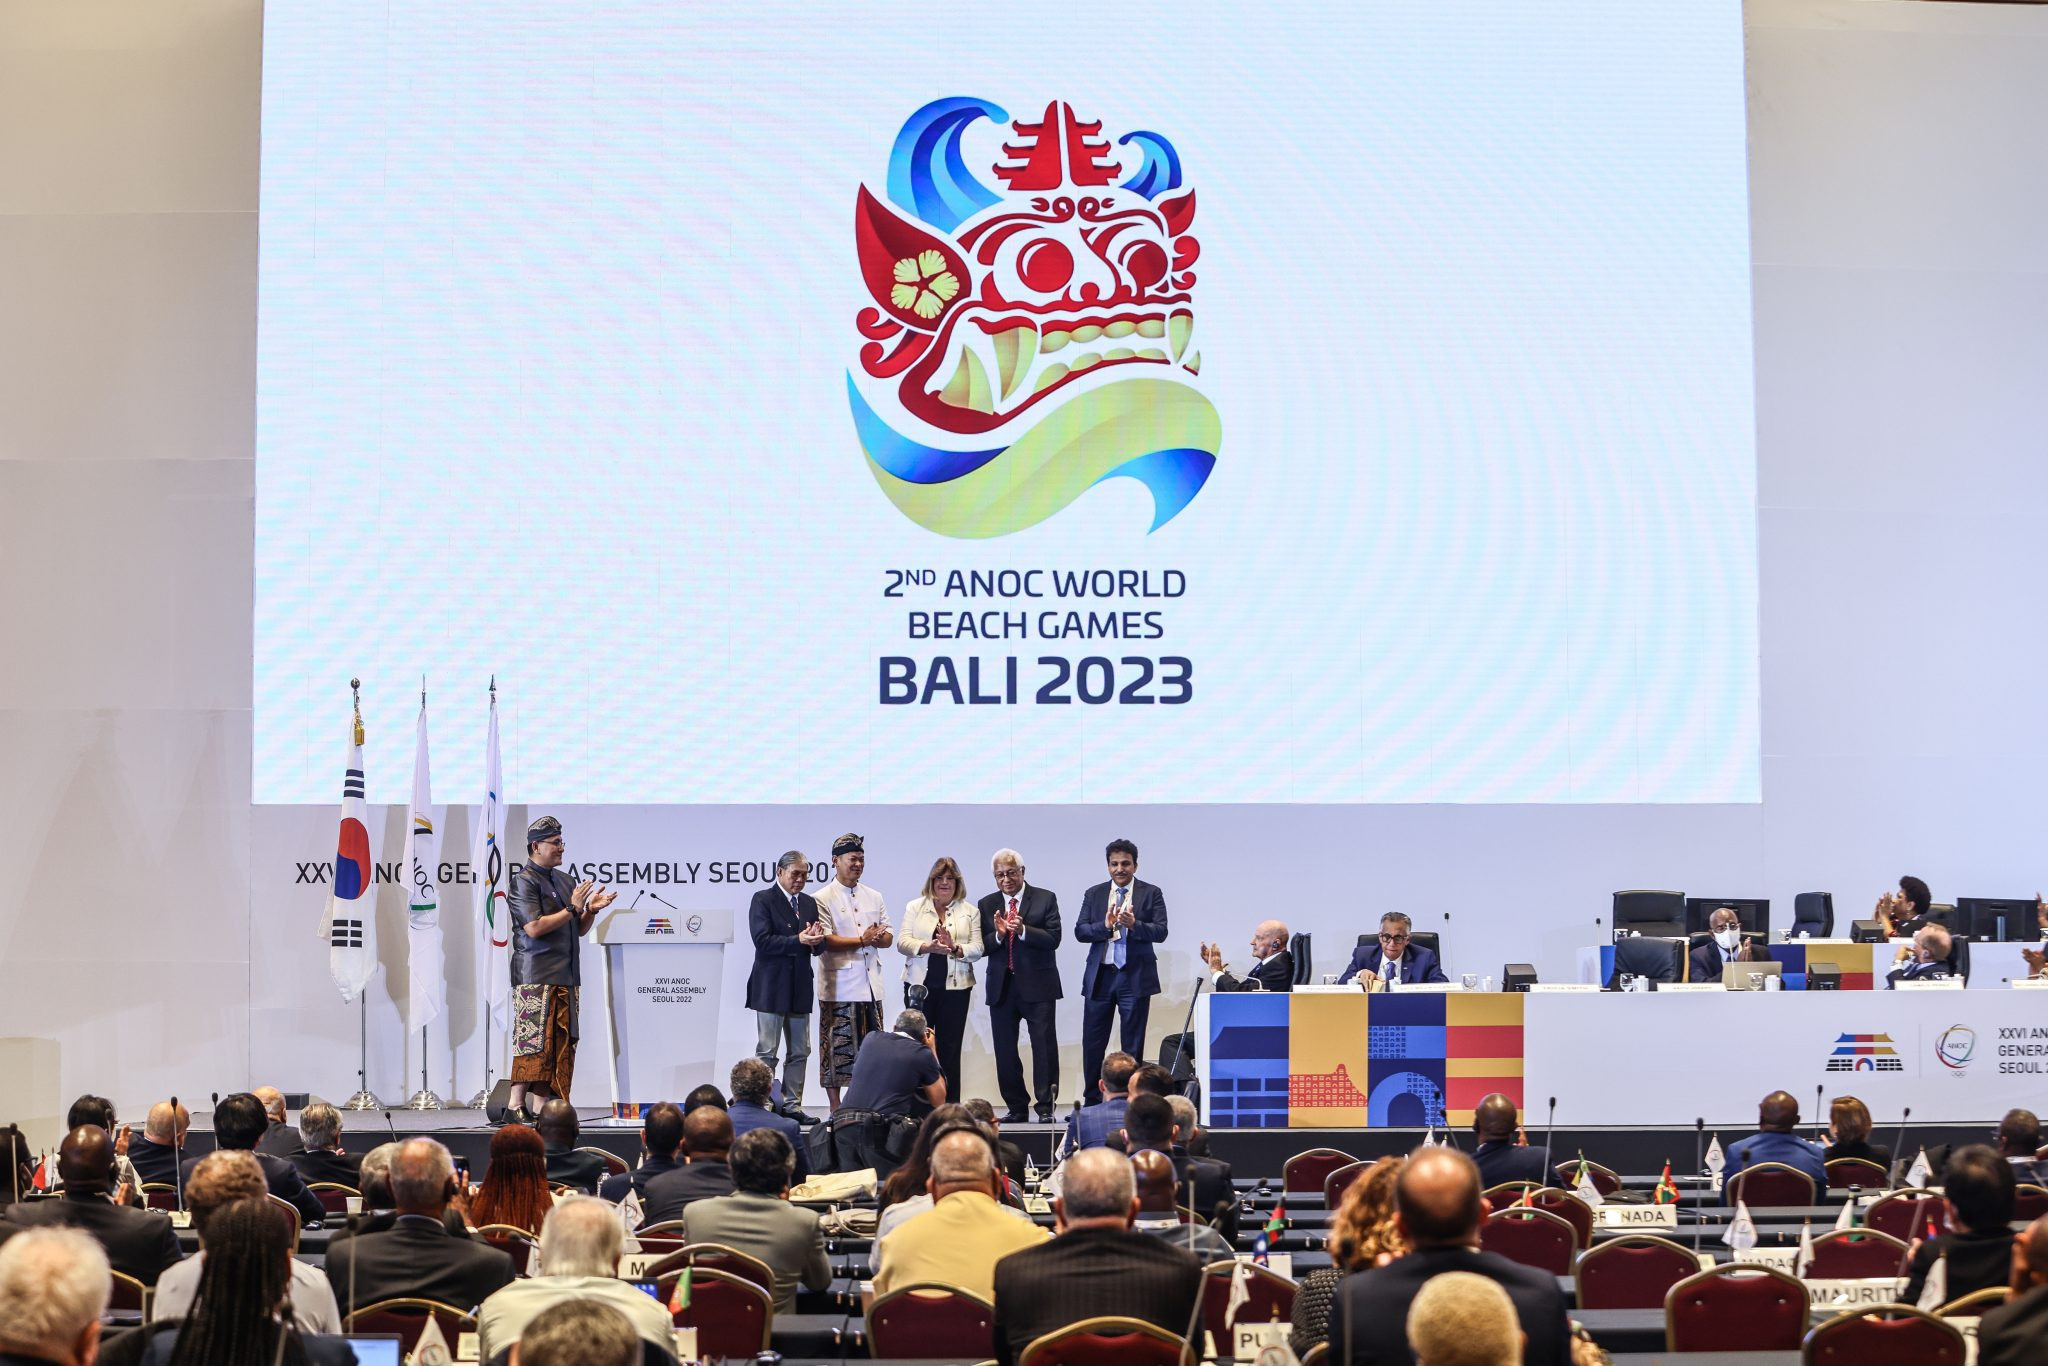 The Host City Contract for the 2023 World Beach Games was signed at the ANOC General Assembly ©ANOC